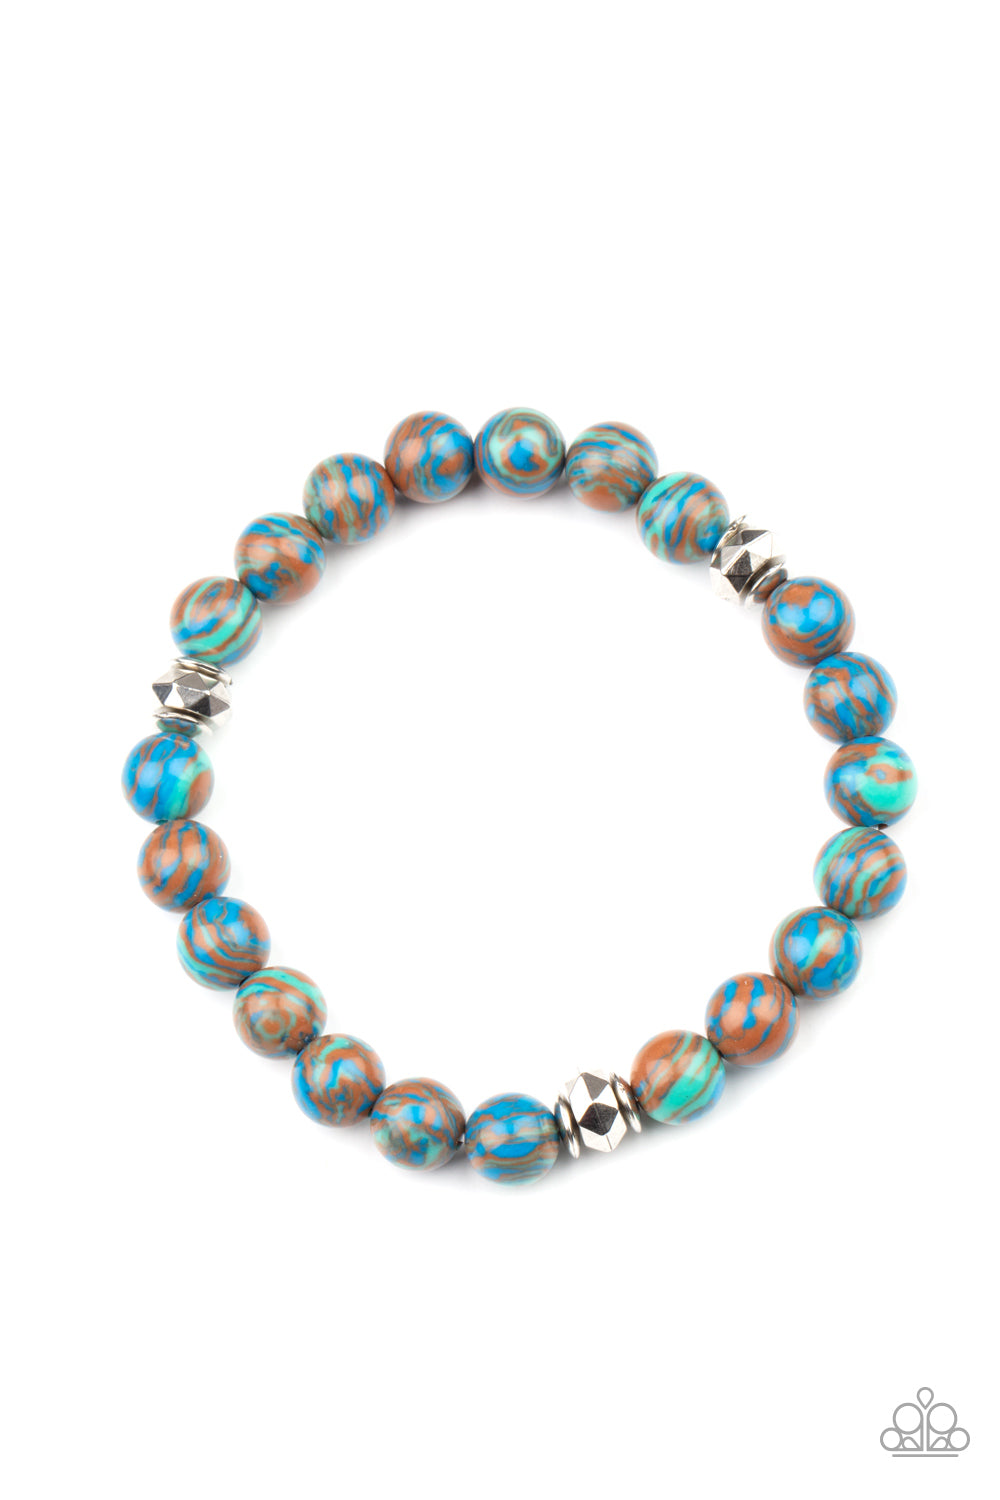 Swirling with blue, green, and brown details, earthy beads and faceted silver accents are threaded along a stretchy band around the wrist for a tranquil look.  Sold as one individual bracelet.